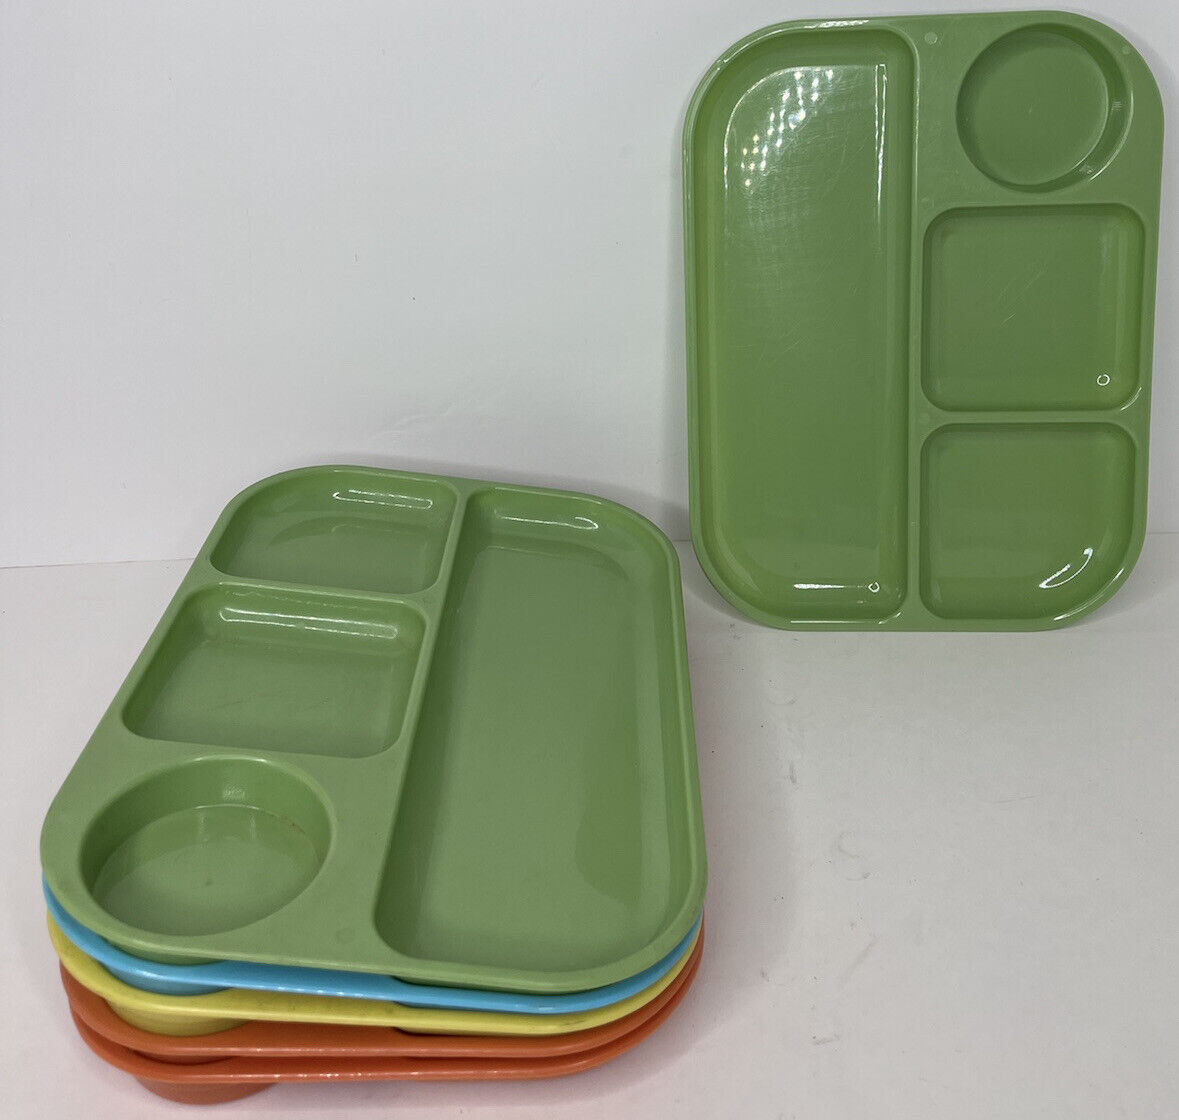 Colonial Plastics Mfg Co Plastic Meal Trays Lot 6 Cleveland OH Vintage